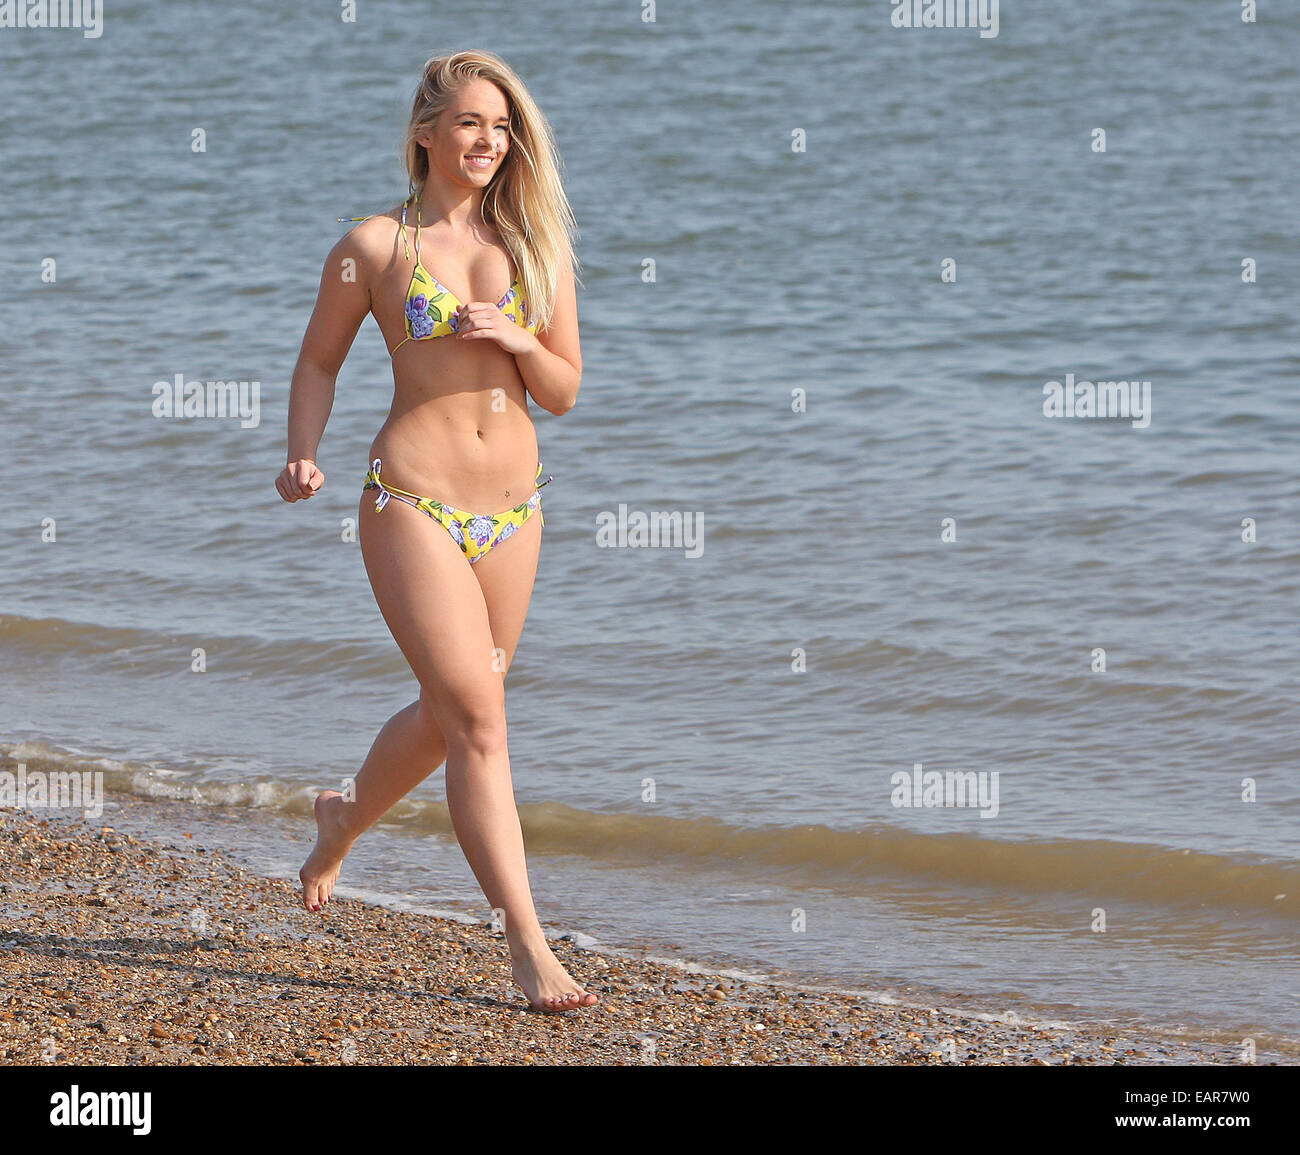 Page 4 - Sophie Martin High Resolution Stock Photography and Images - Alamy